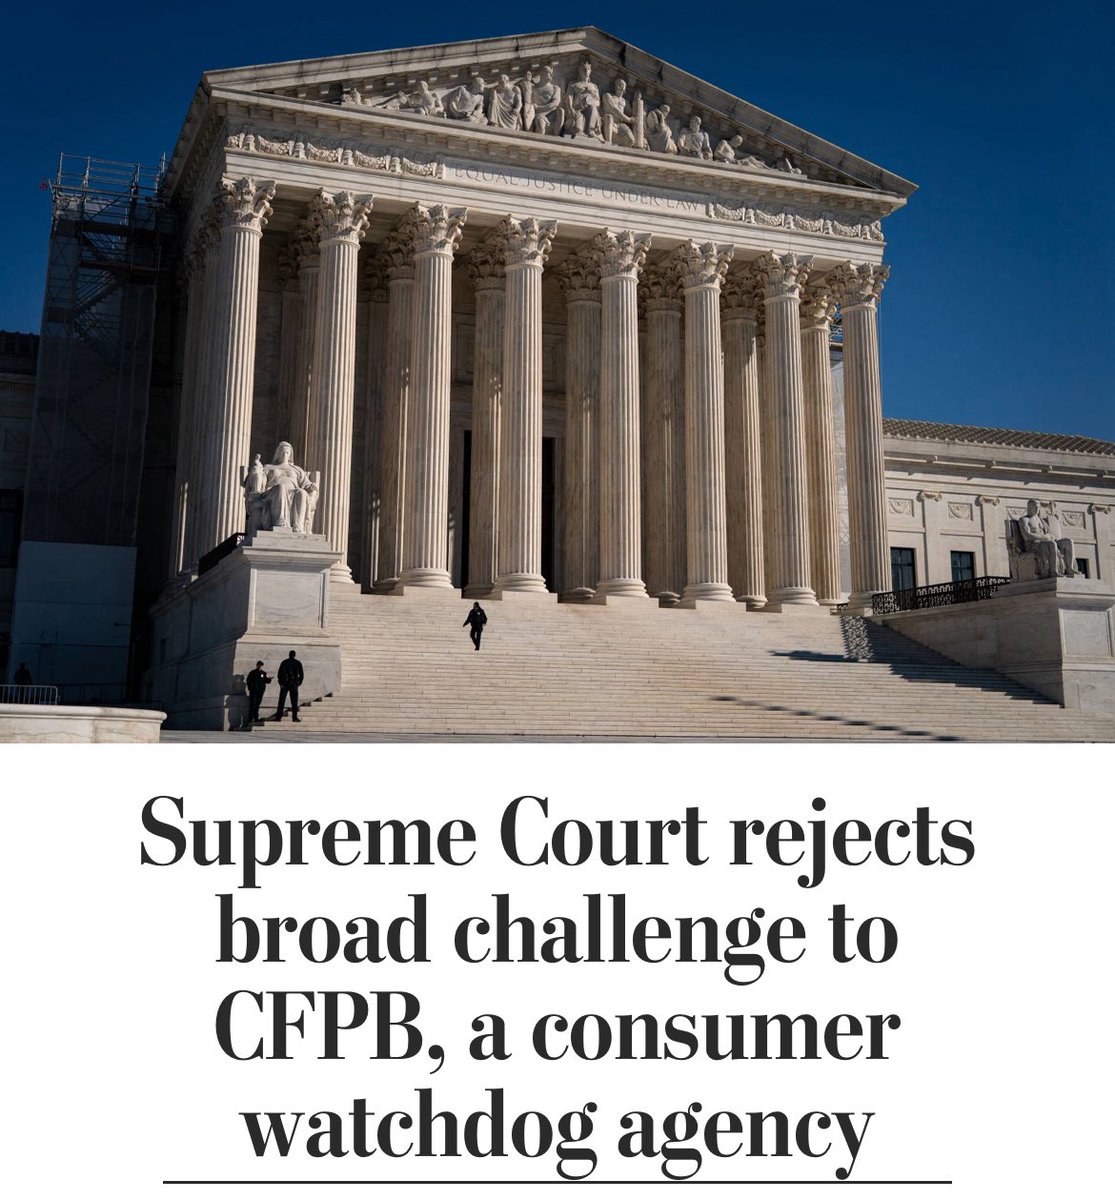 #USDemocracy #DemVoice1 Occasionally, this court rules on the side of the law. The Supreme Court Thursday rejected a broad challenge to the Consumer Financial Protection Bureau, reversing a lower-court ruling that would have undermined the watchdog agency. The case is one of